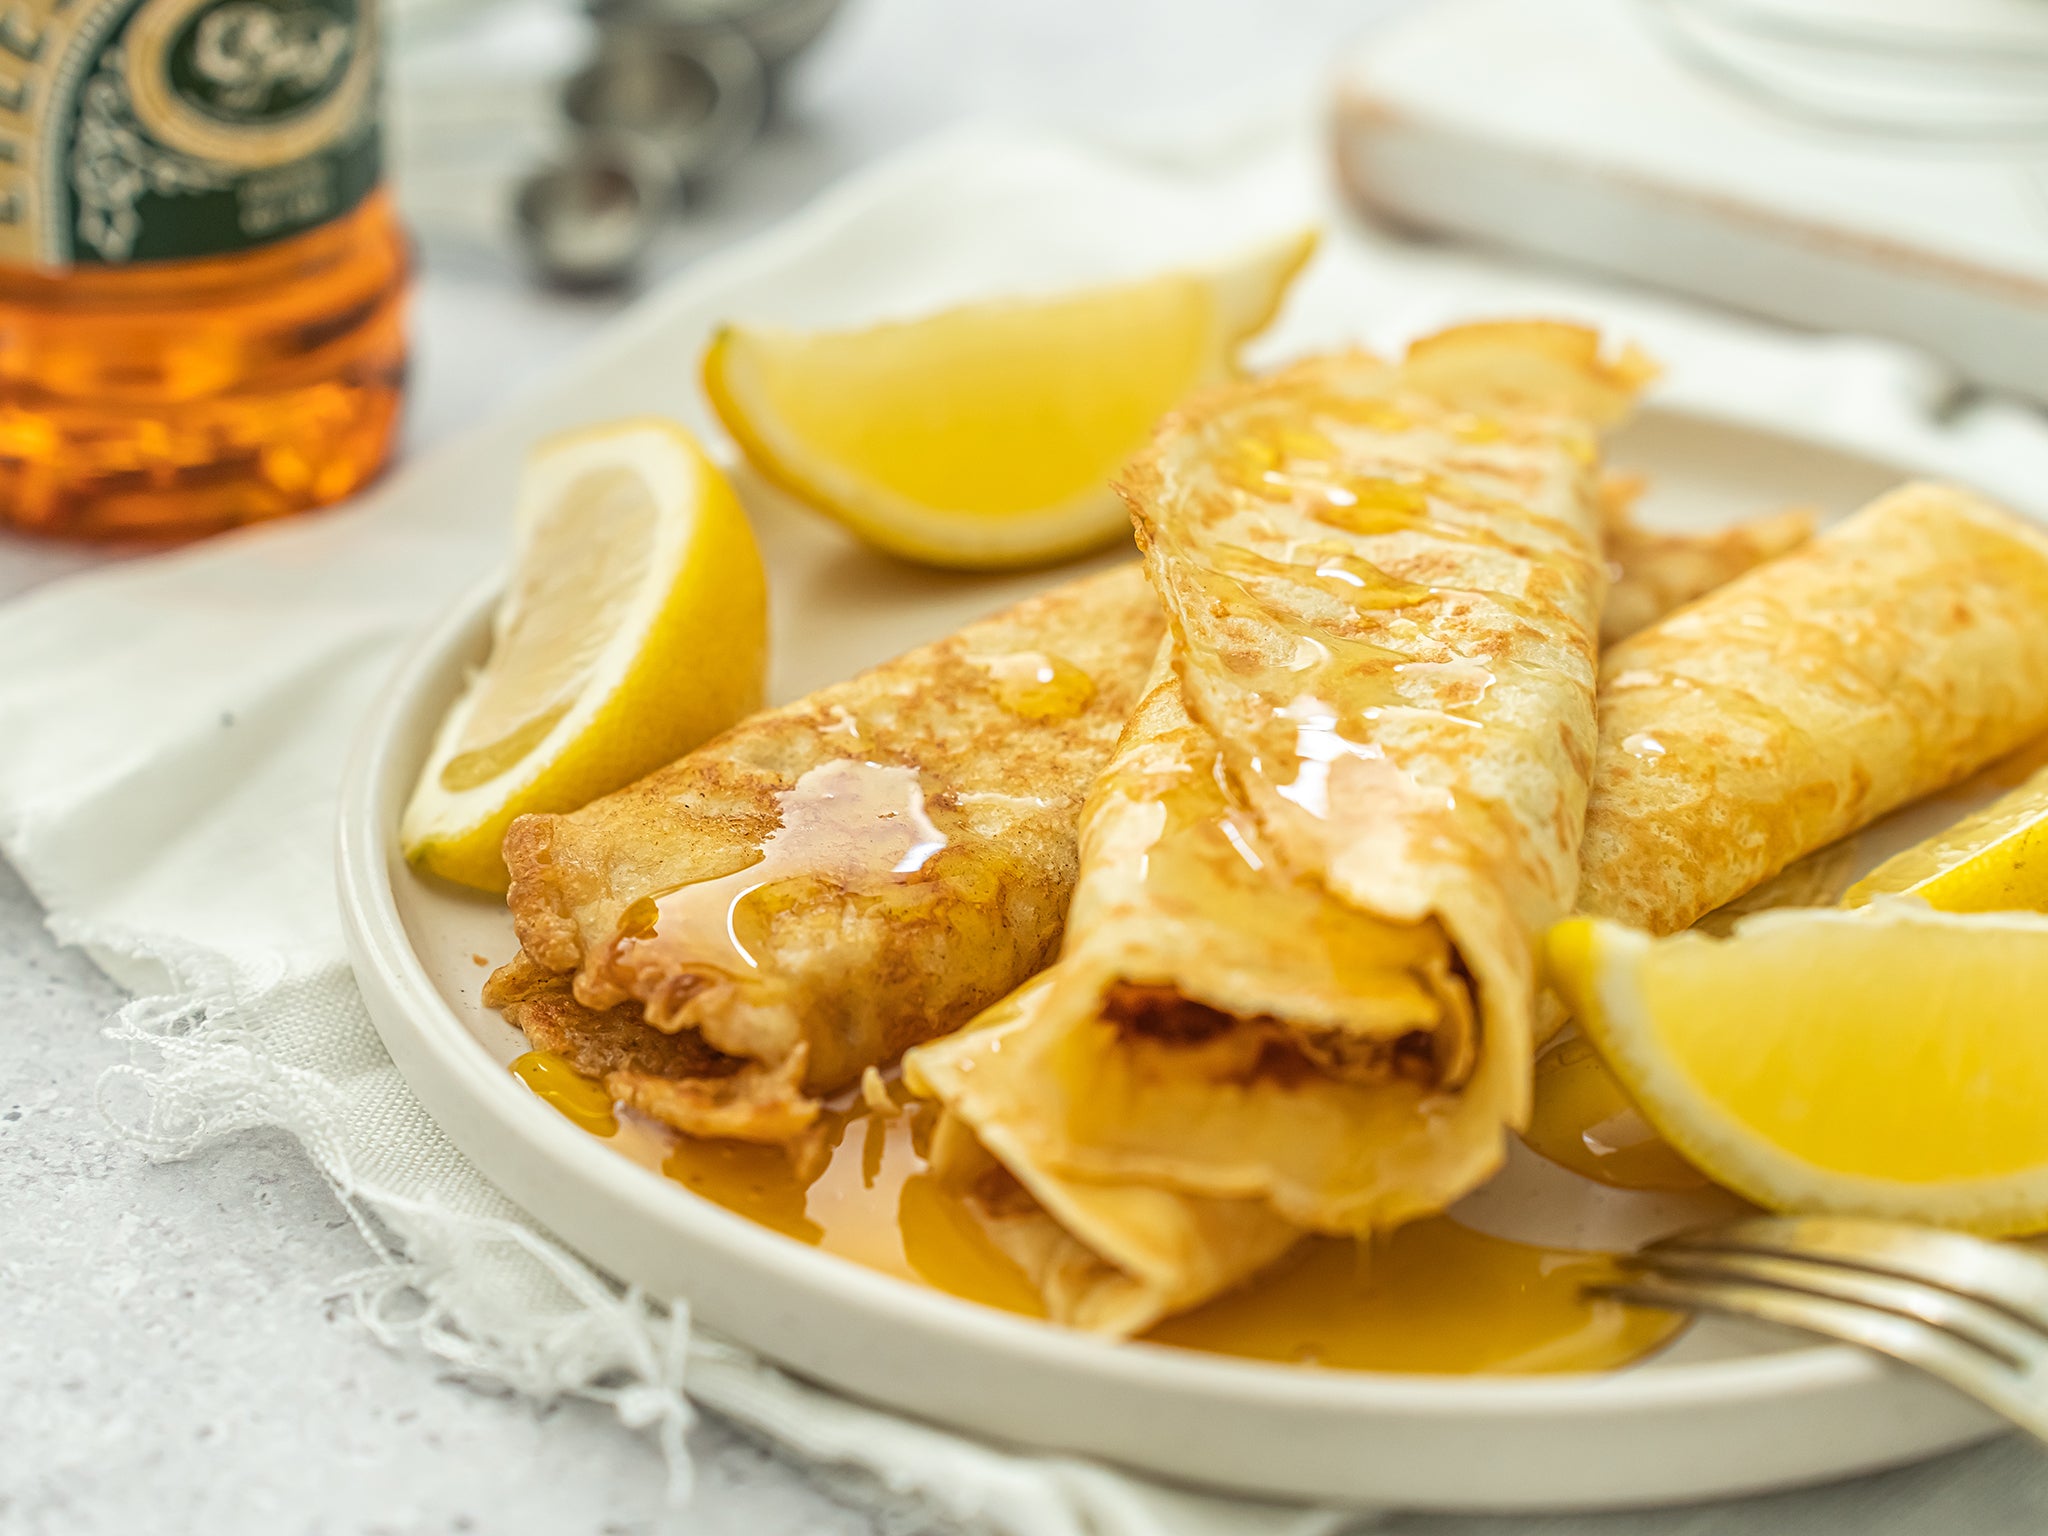 Golden syrup cannot be missed with these crêpes